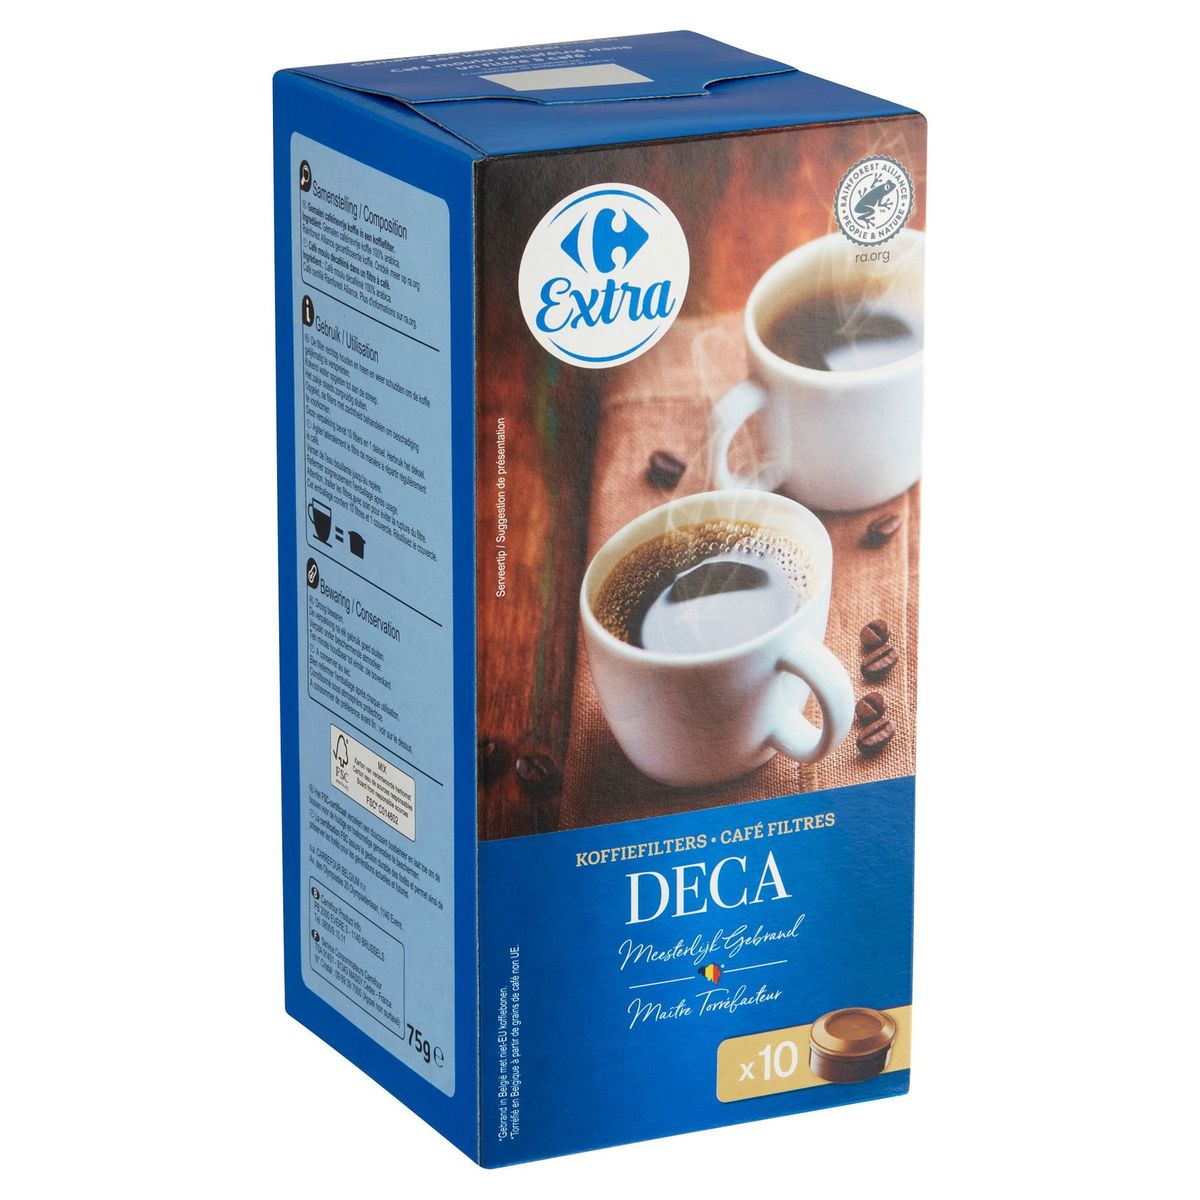 Carrefour Extra Koffiefilters Deca10 Stuks 75 g